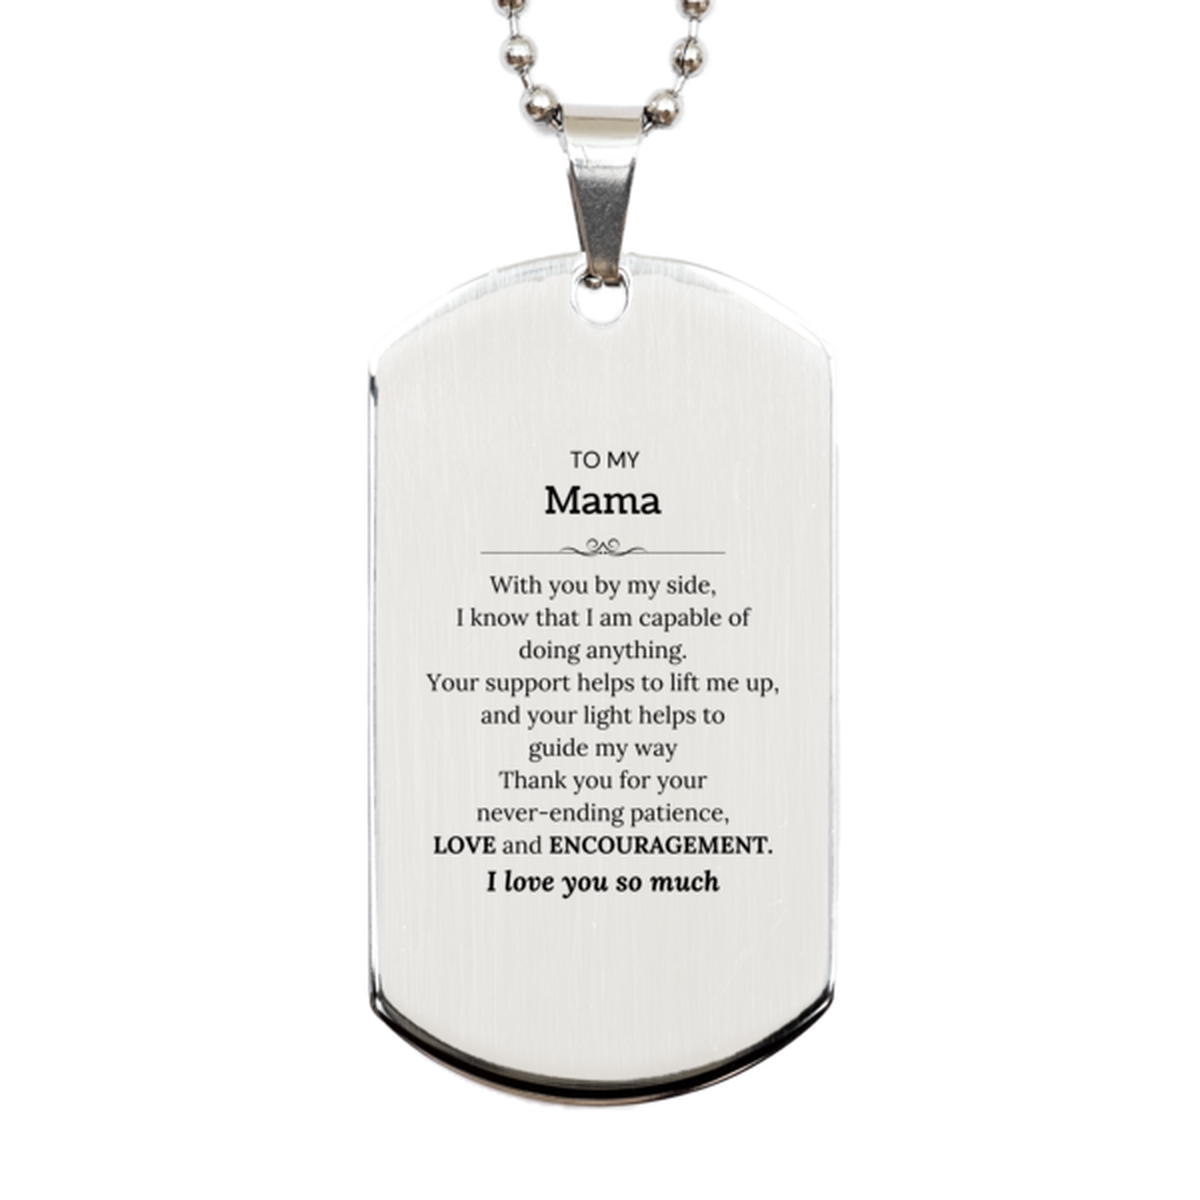 Appreciation Mama Silver Dog Tag Gifts, To My Mama Birthday Christmas Wedding Keepsake Gifts for Mama With you by my side, I know that I am capable of doing anything. I love you so much